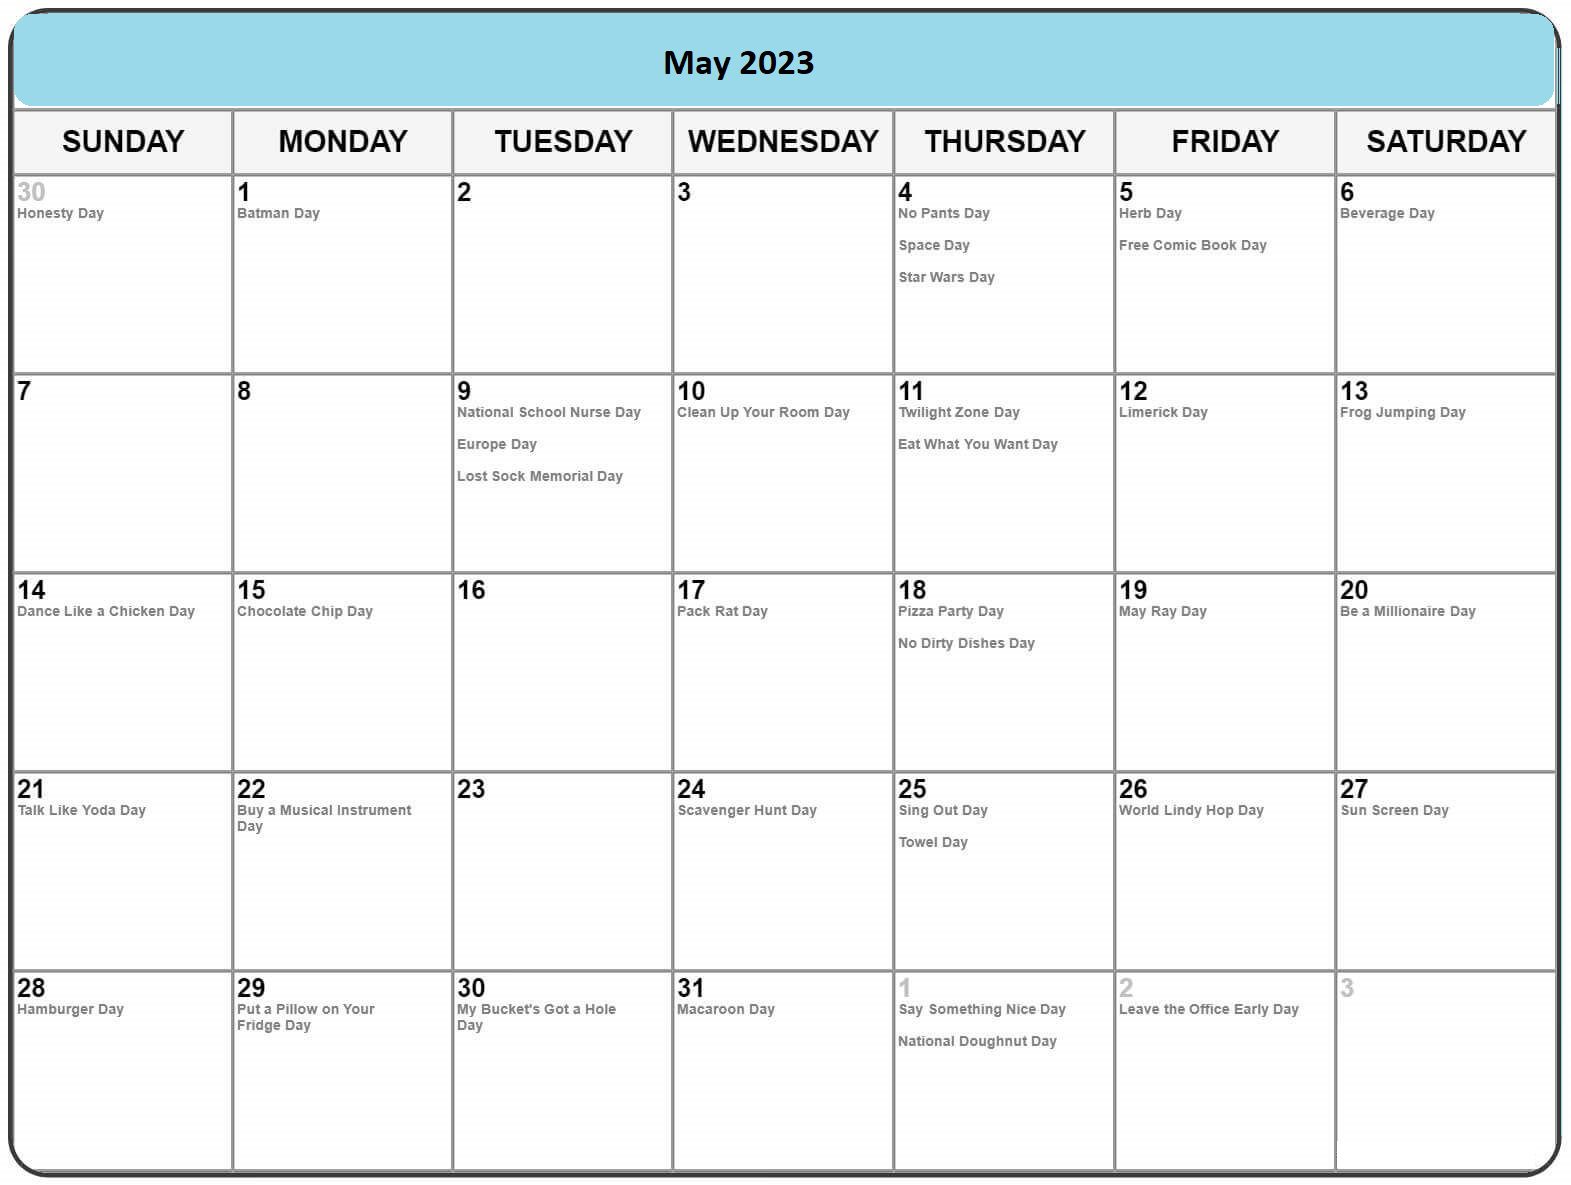 May 2023 Calendar Holidays with Dates